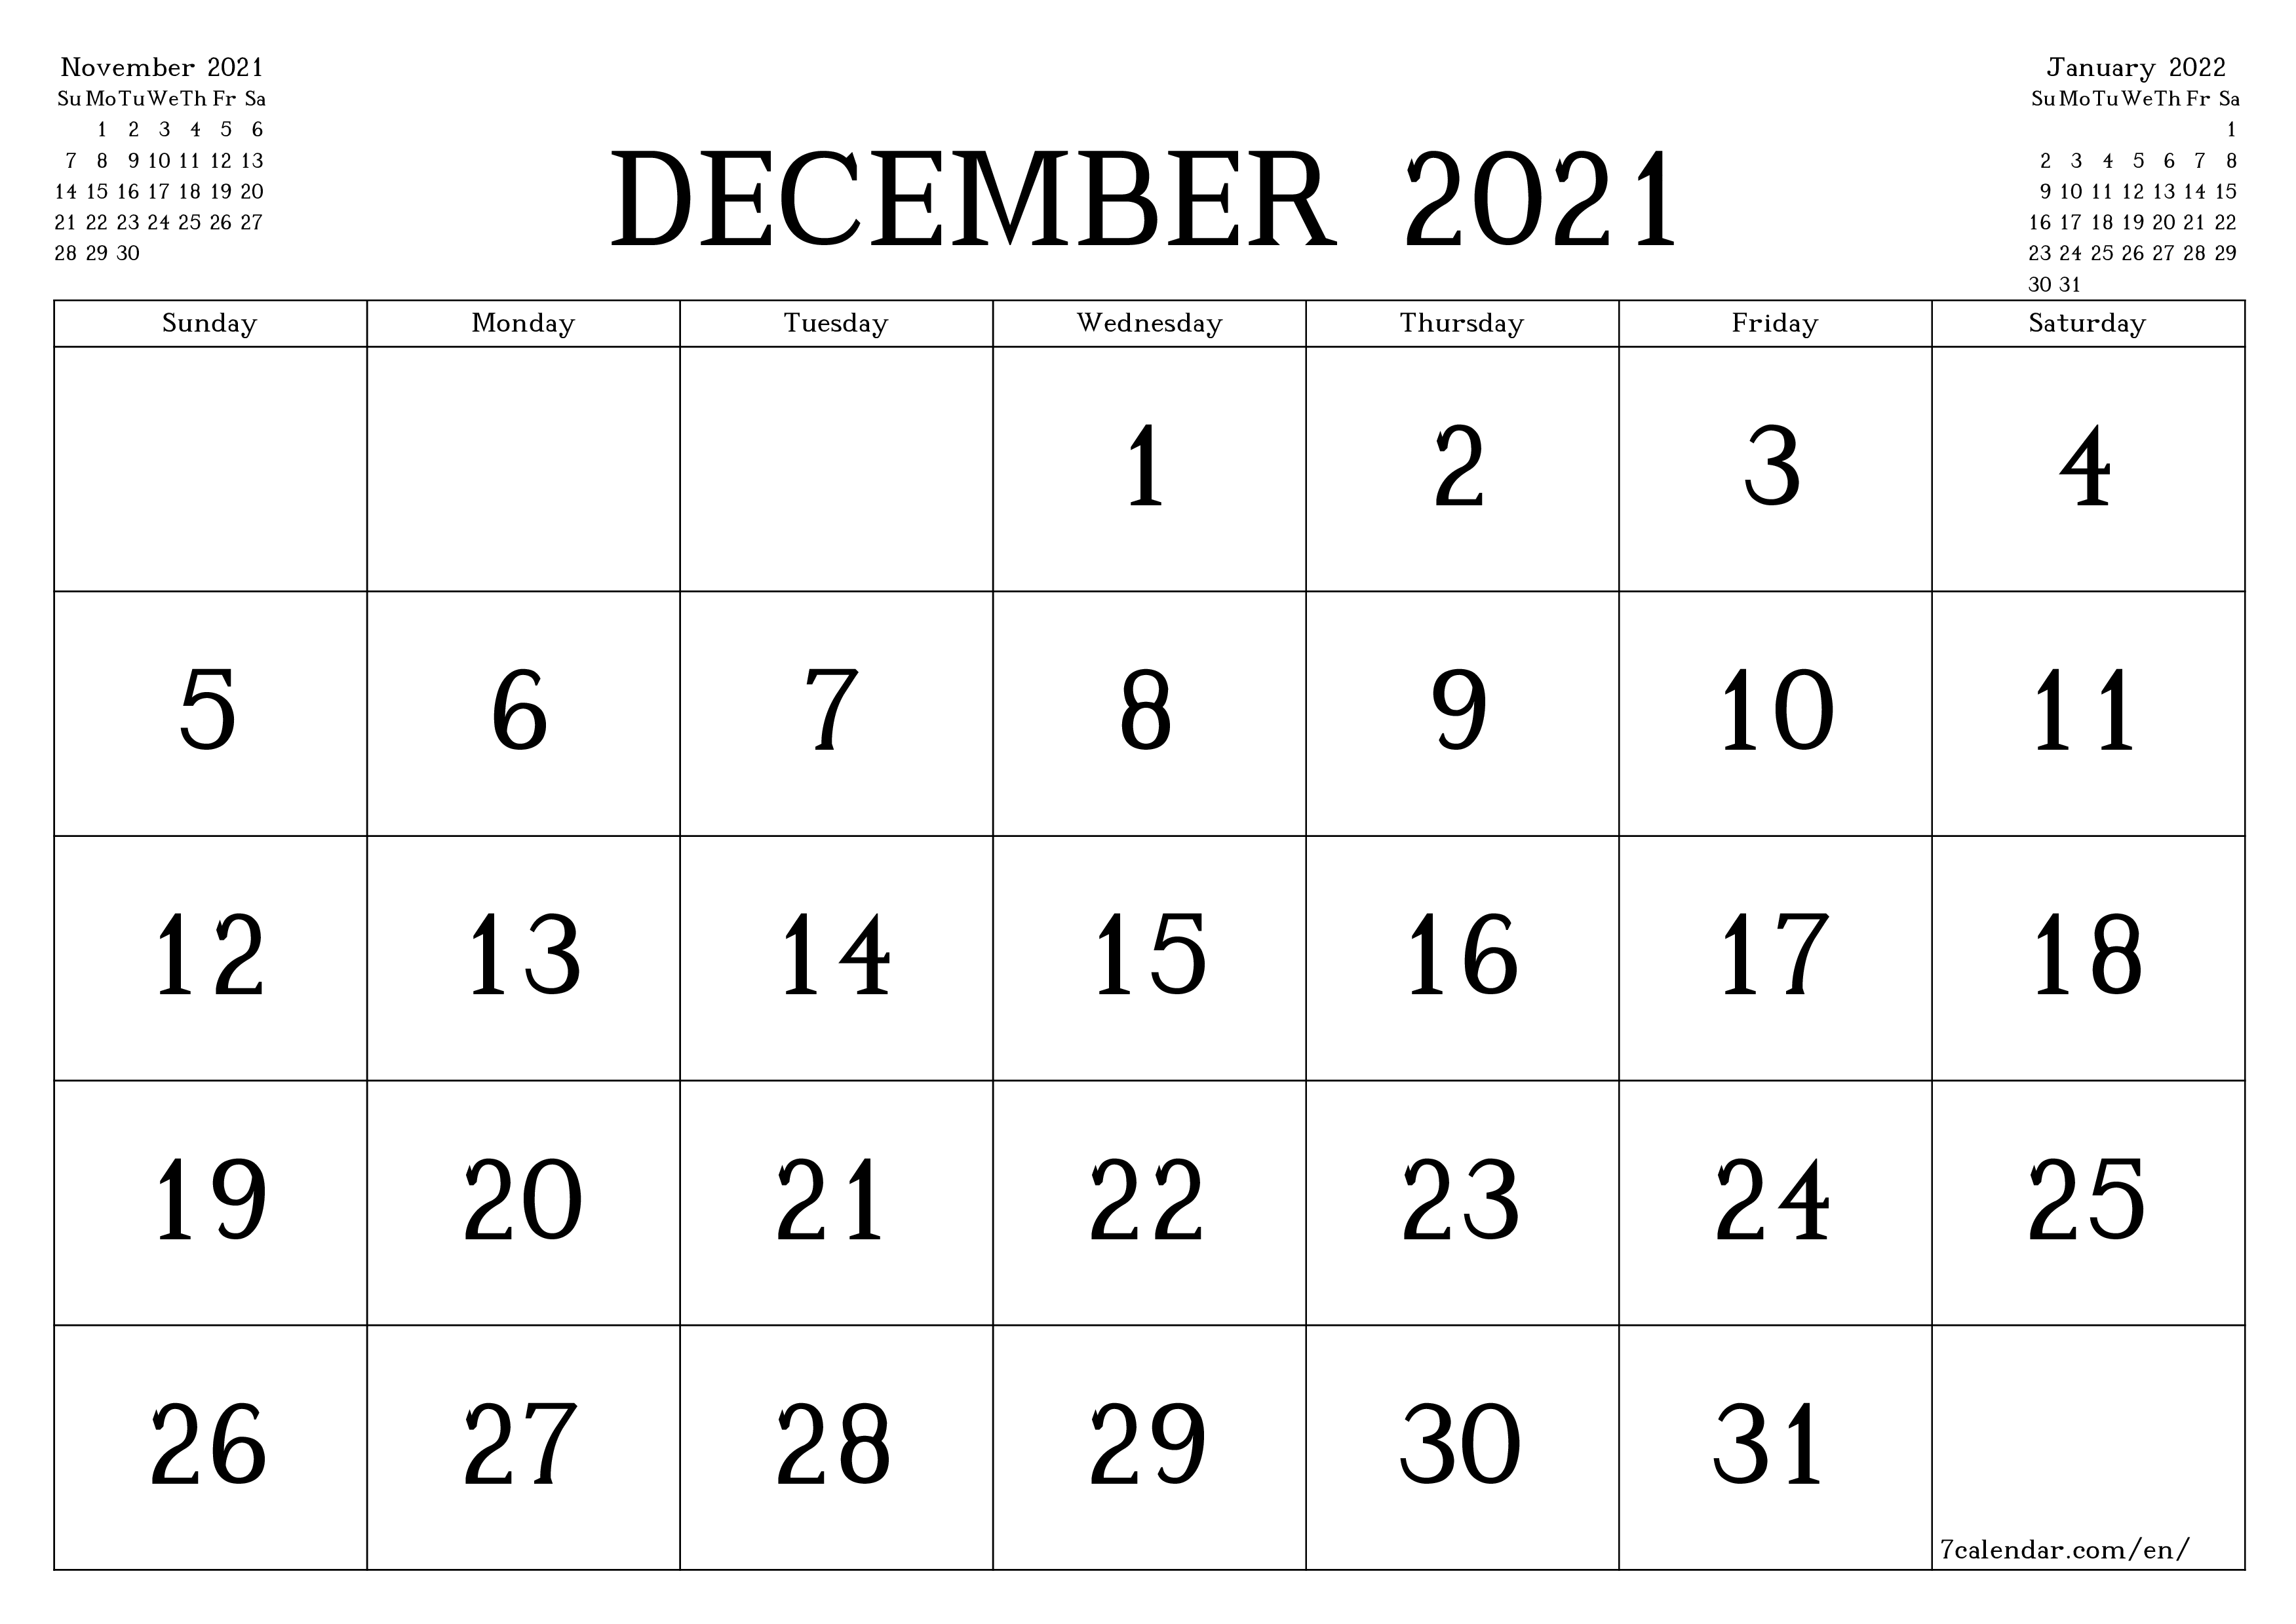 Blank monthly dated HD template image of calendar for month December 2021 save and print to PDF PNG English - 7calendar.com